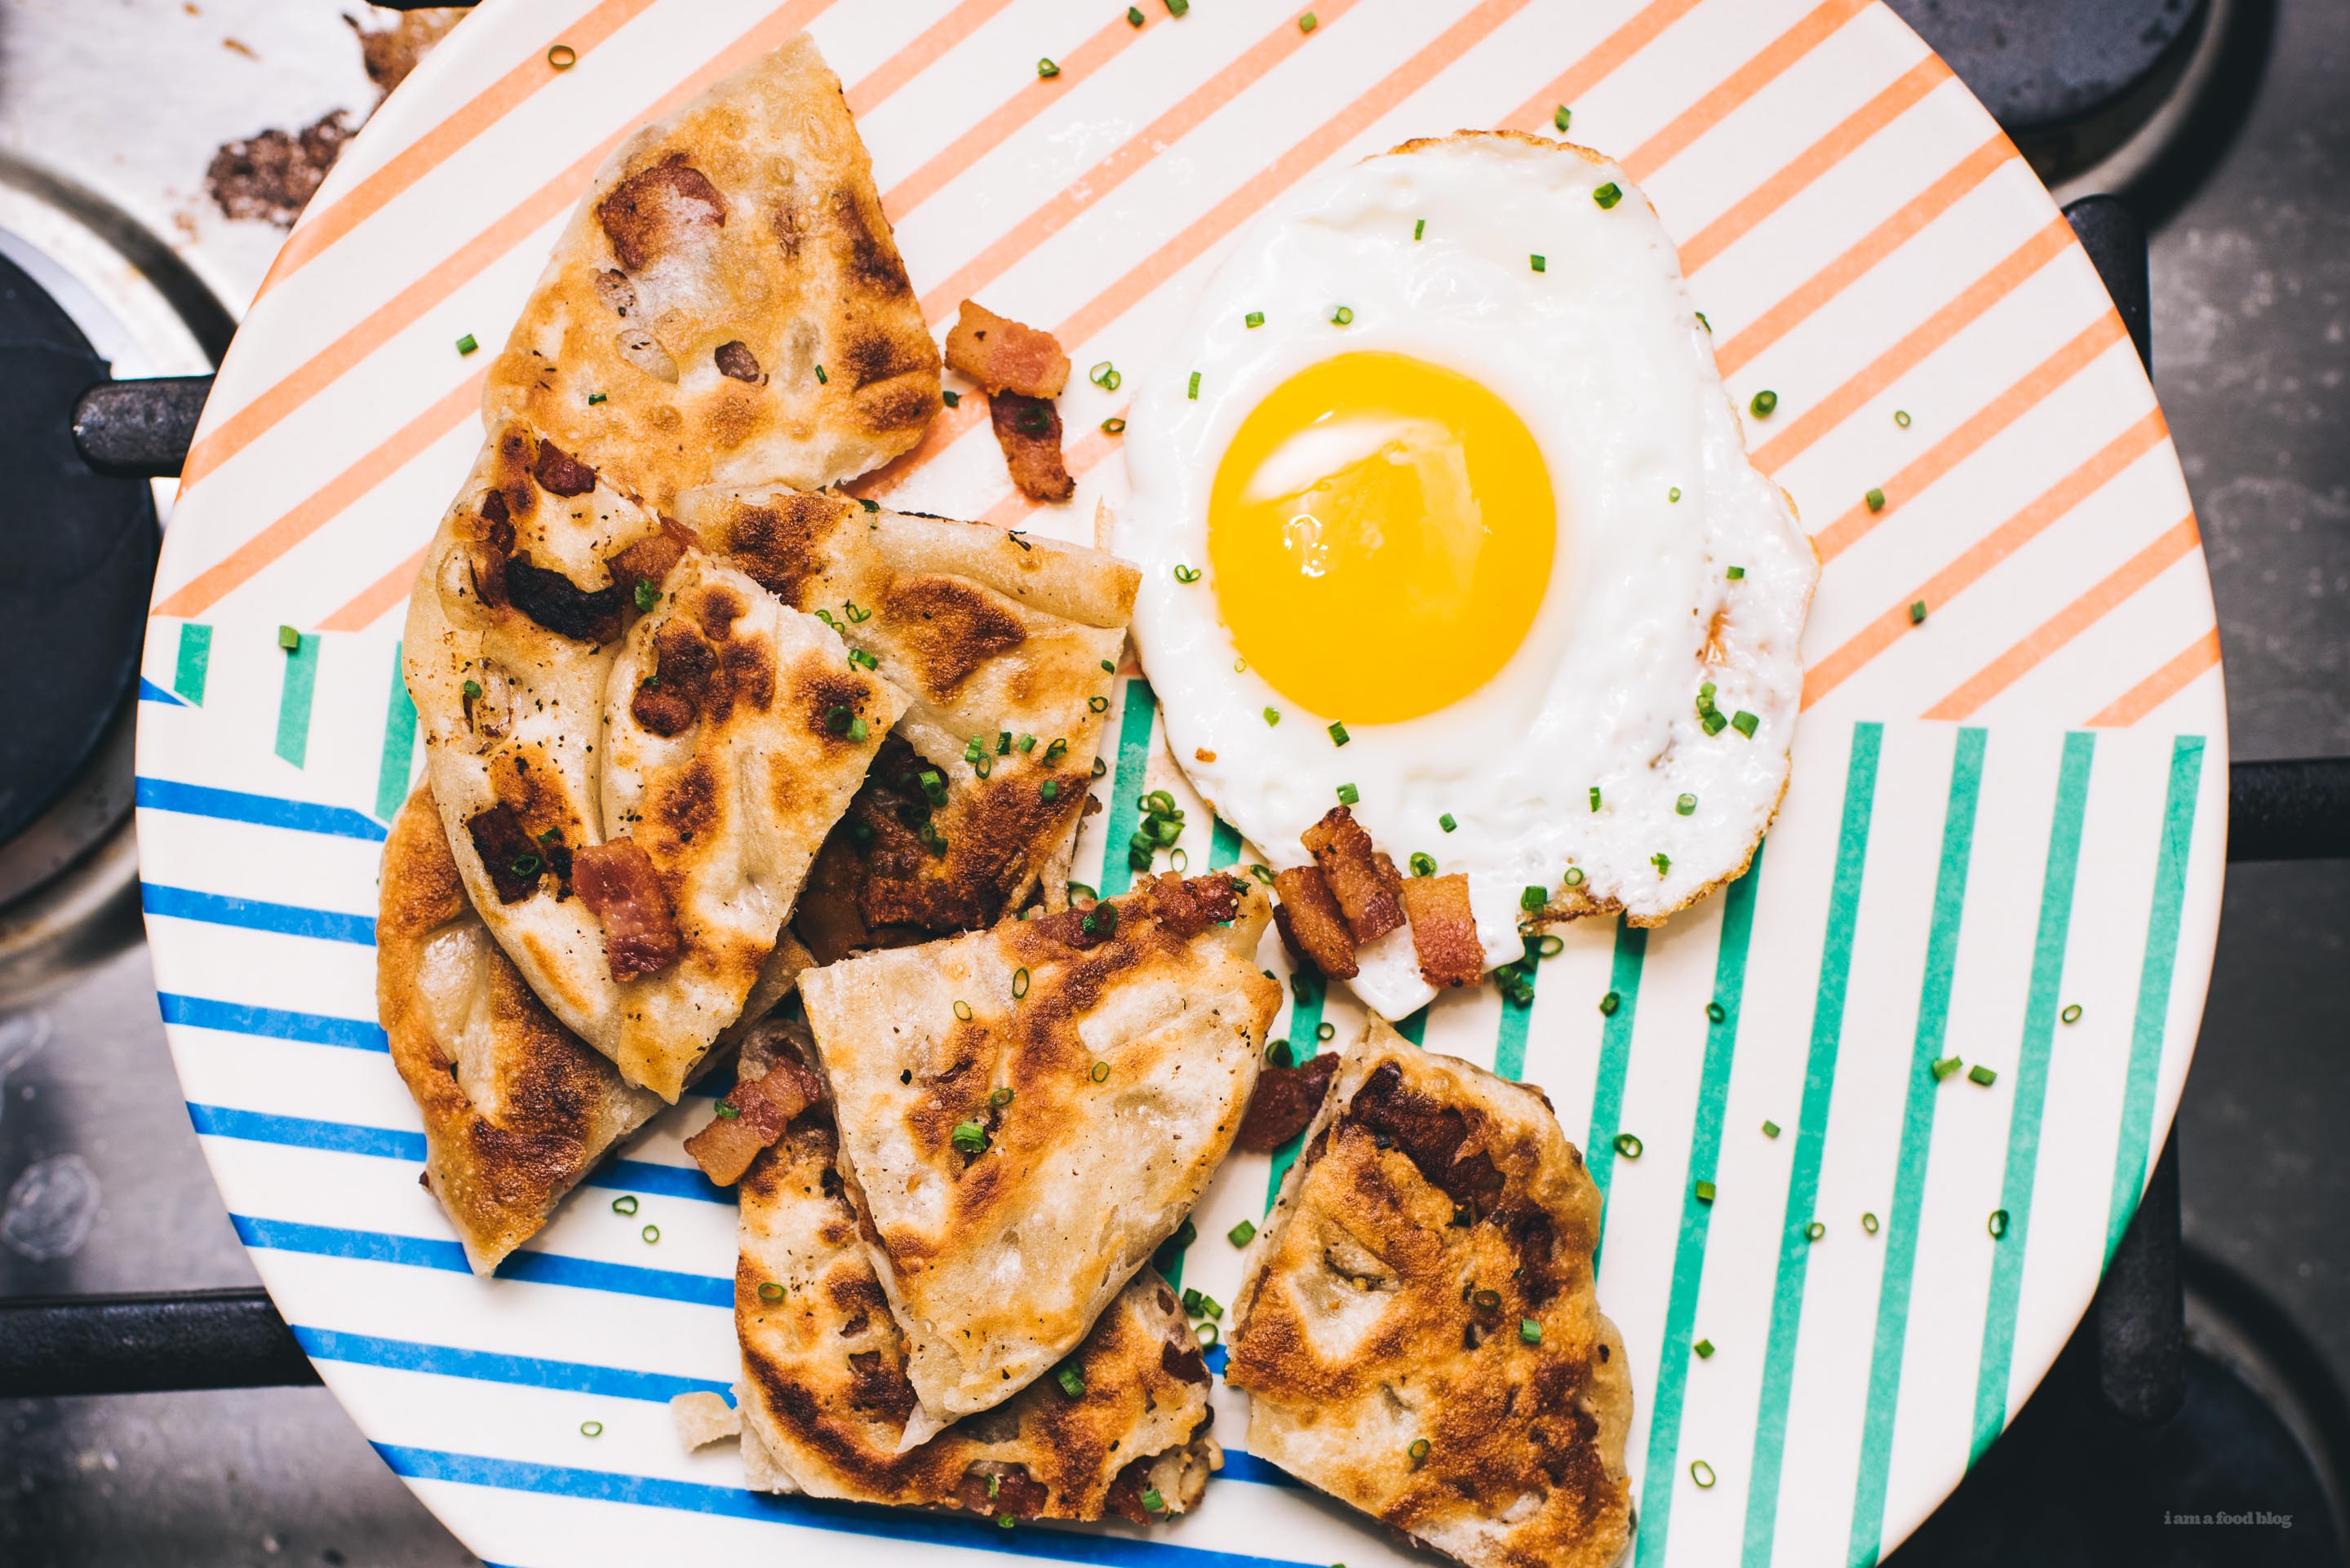 Bacon Bing Bread: a Breakfast-y Take on Classic Chinese Pancakes